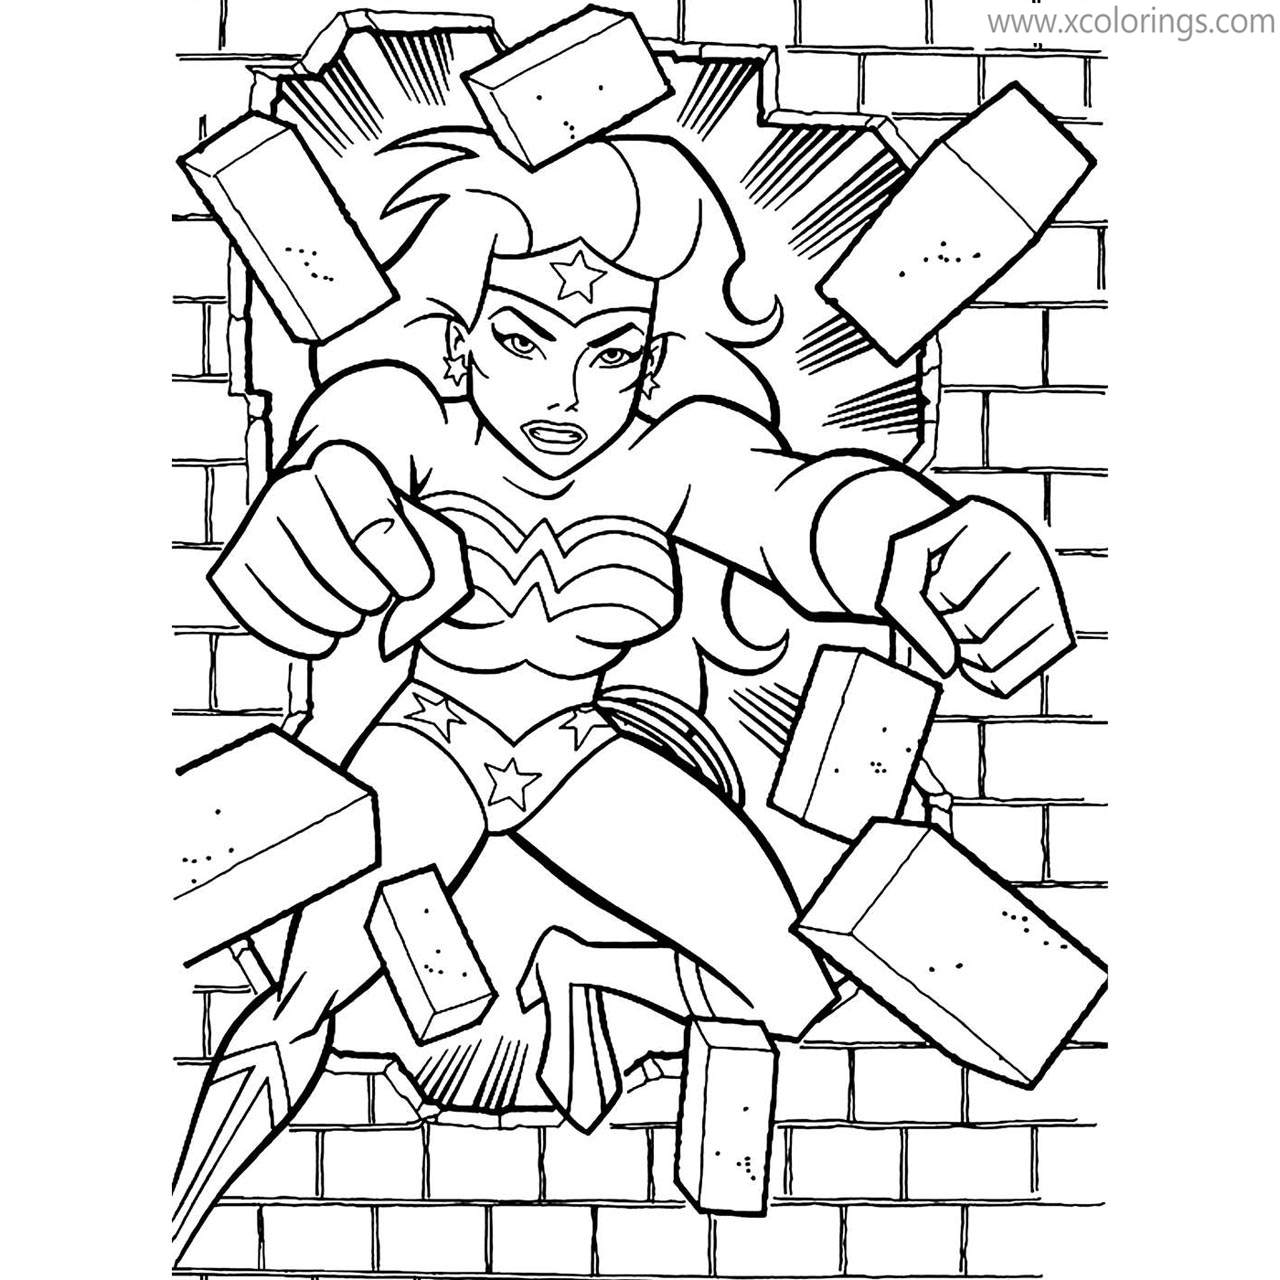 Free Animated Wonder Woman Coloring Pages Get Through the Wall printable